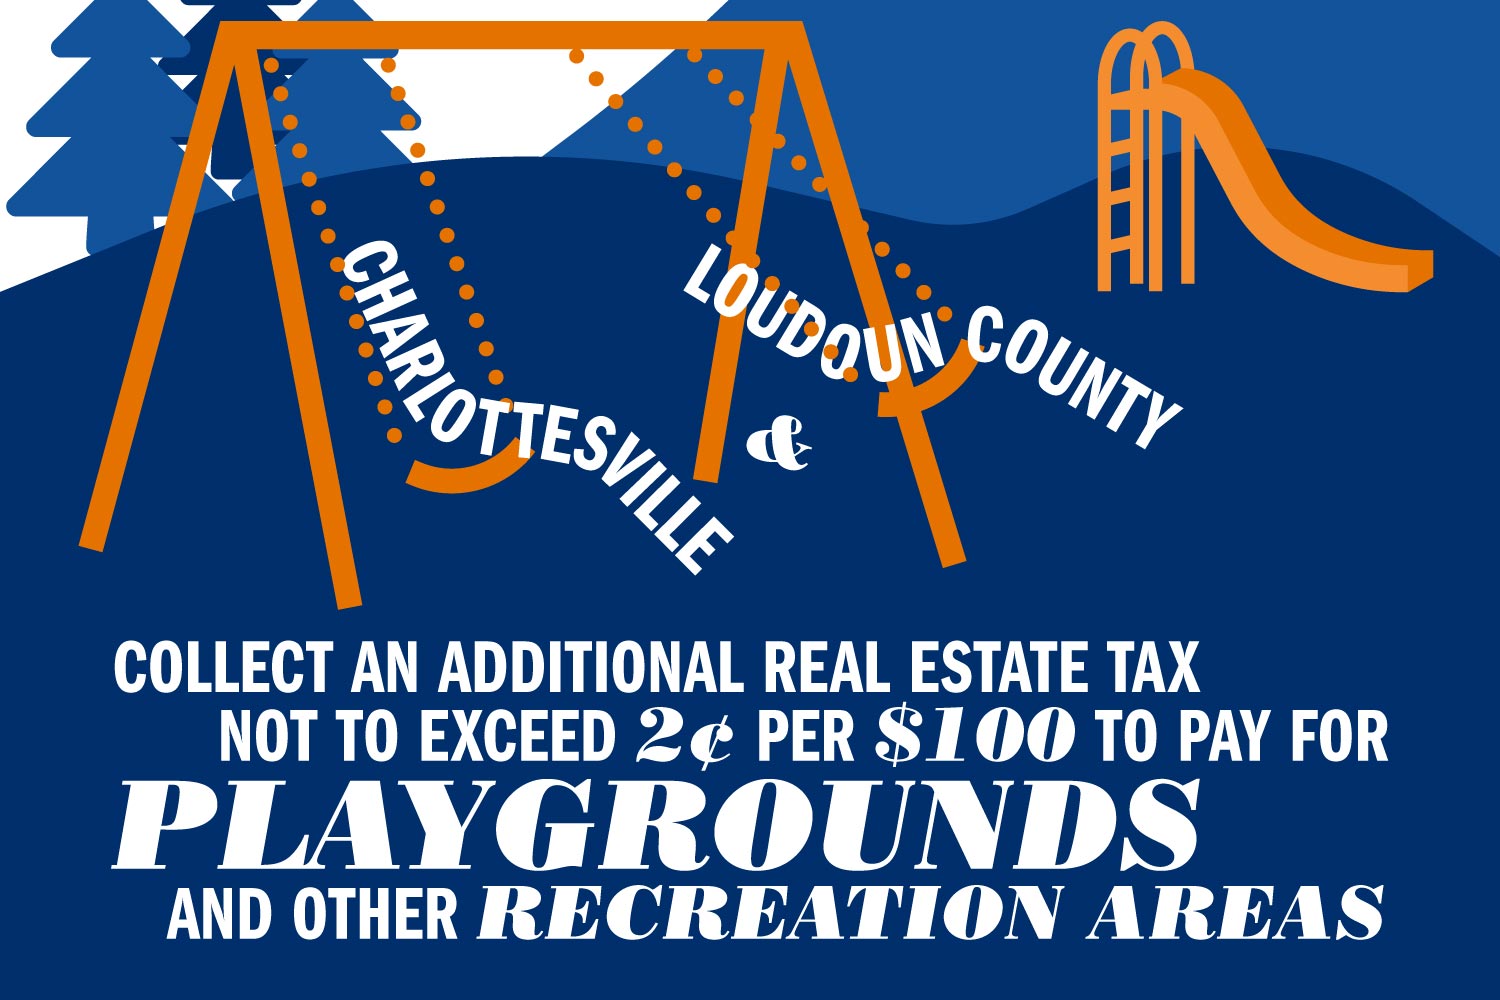 Text reads: Collect and additional real estate tax not to exceed 2 cents per $100 to pay for playgrounds and other recreation areas